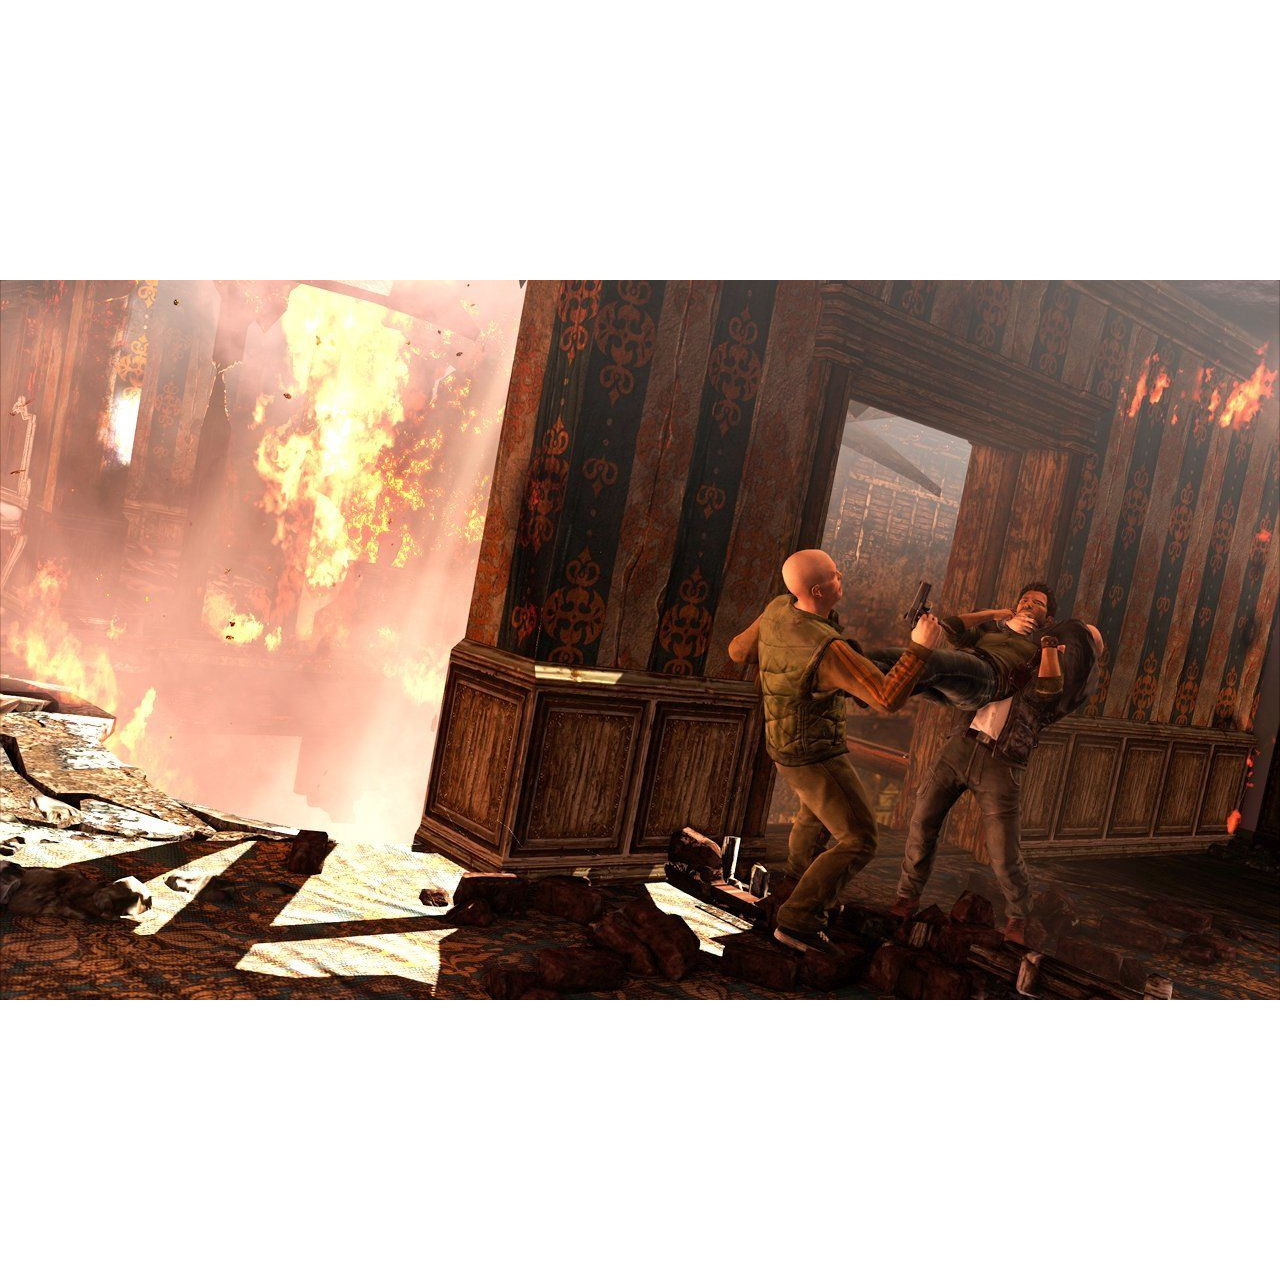 Игра PlayStation 4 Uncharted Collection /HITS/